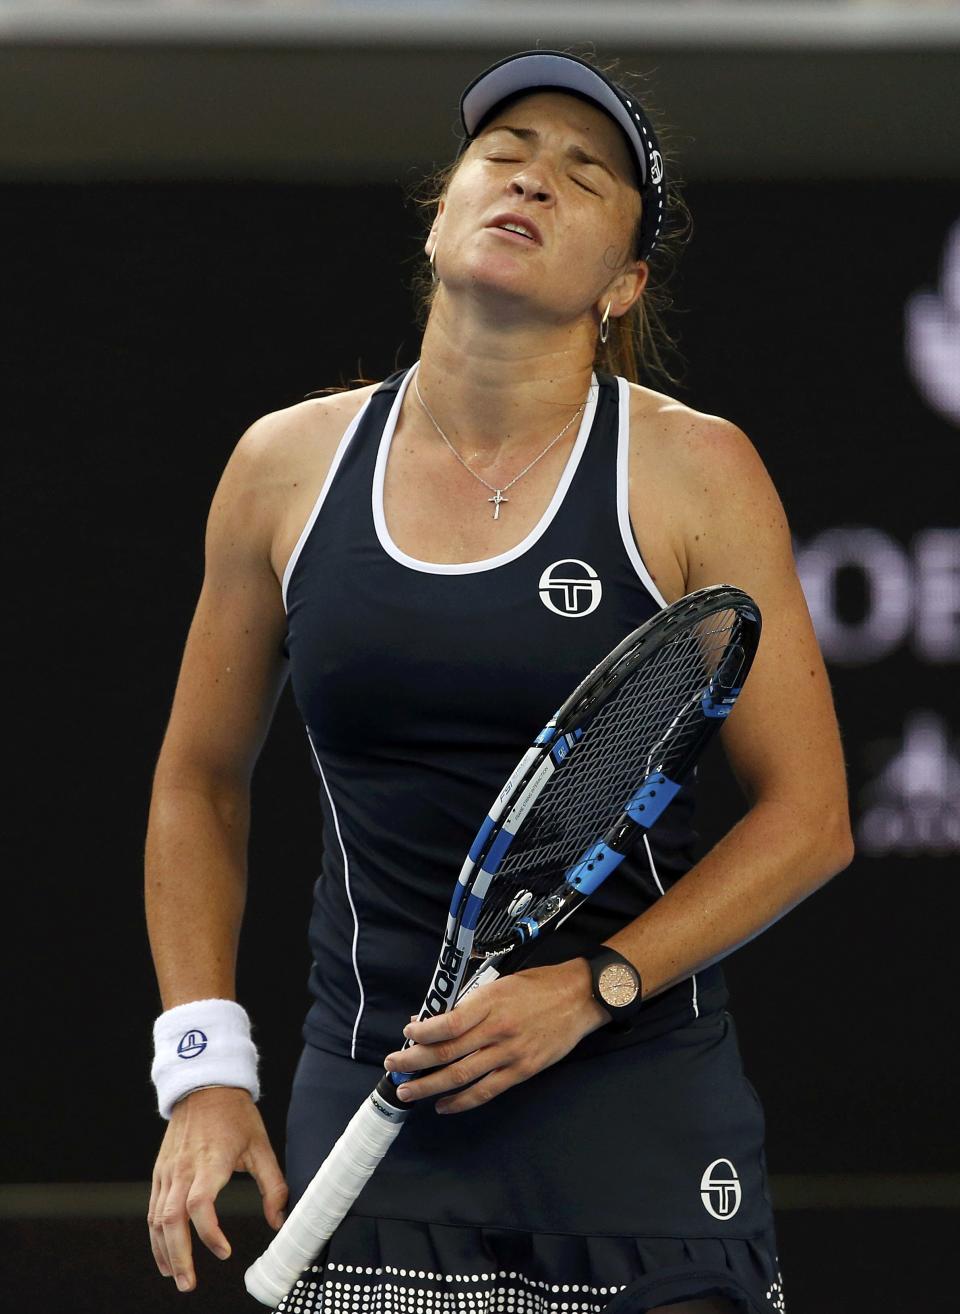 Romania's Alexandra Dulgheru reacts during her second round match against Germany's Angelique Kerber at the Australian Open tennis tournament at Melbourne Park, Australia, January 21, 2016. REUTERS/Jason Reed